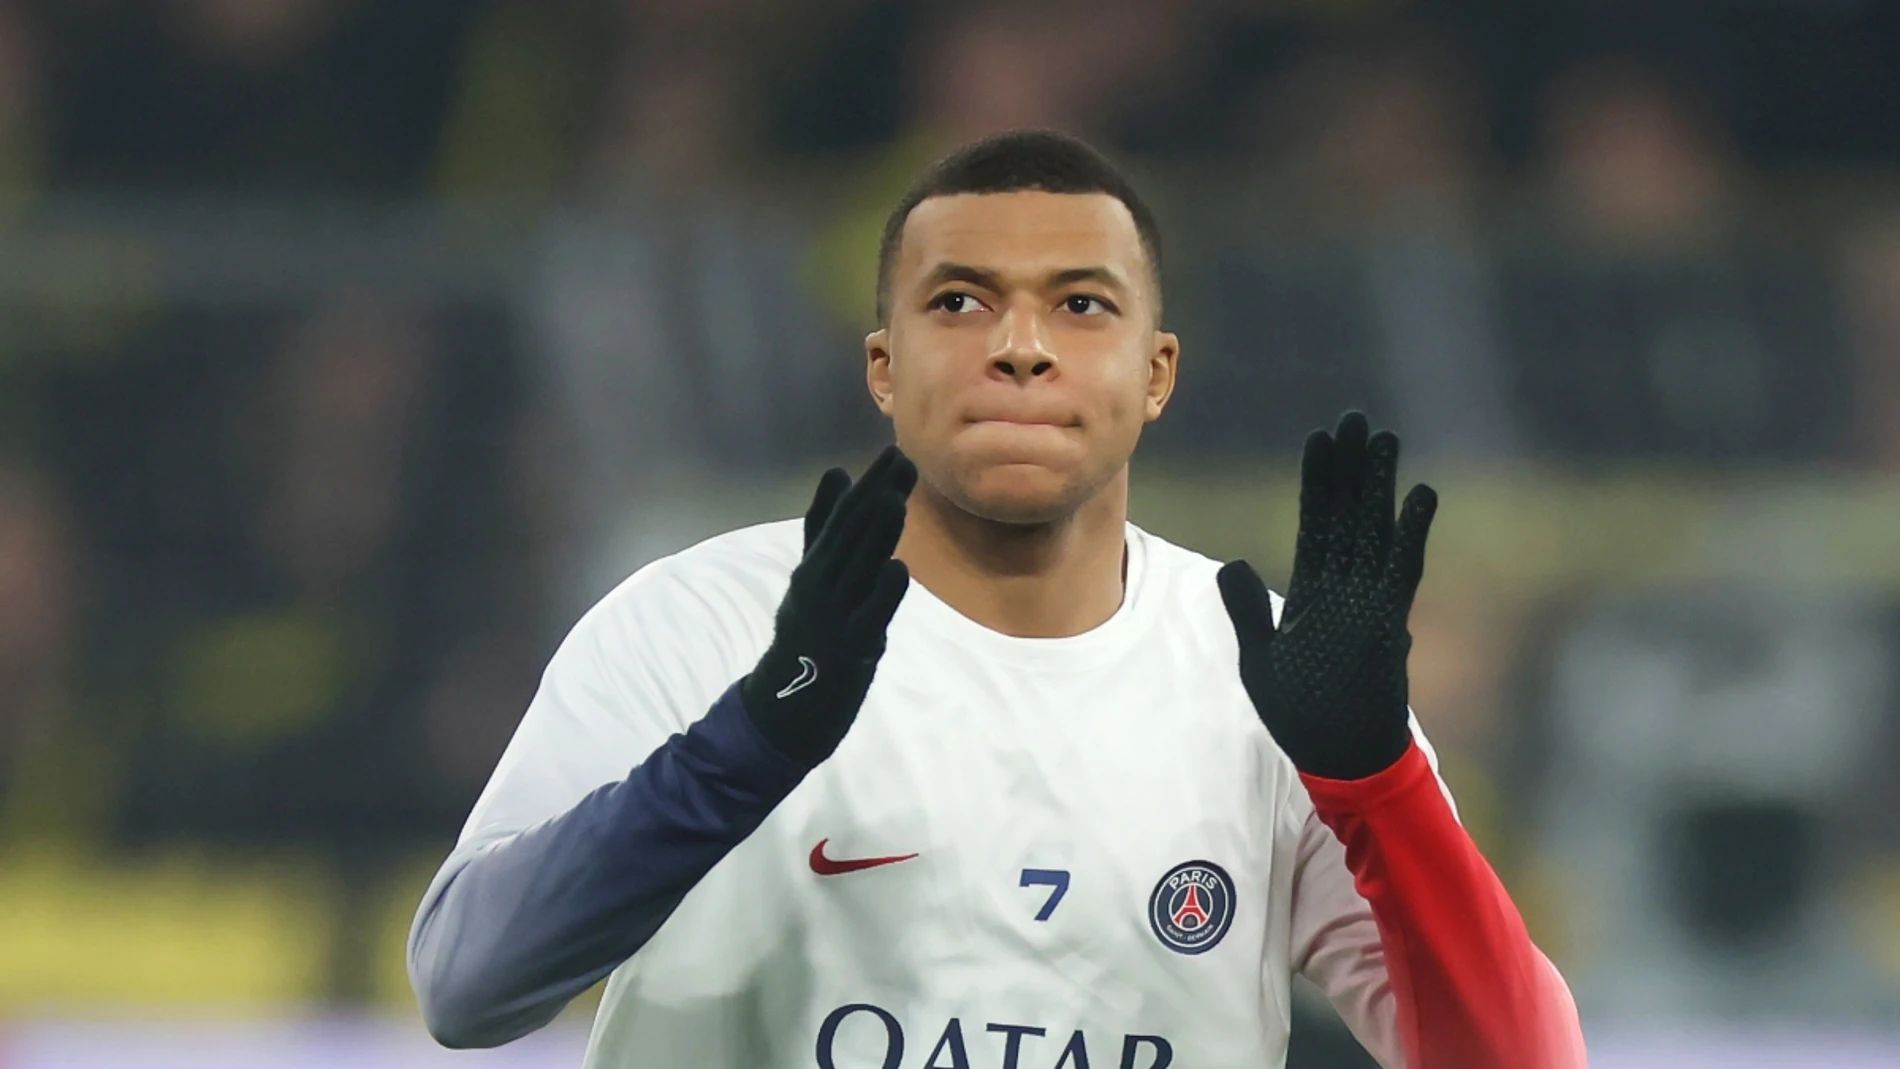 Kylian Mbappe tells Paris Saint-Germain that he will leave this summer, Real Madrid expected destination